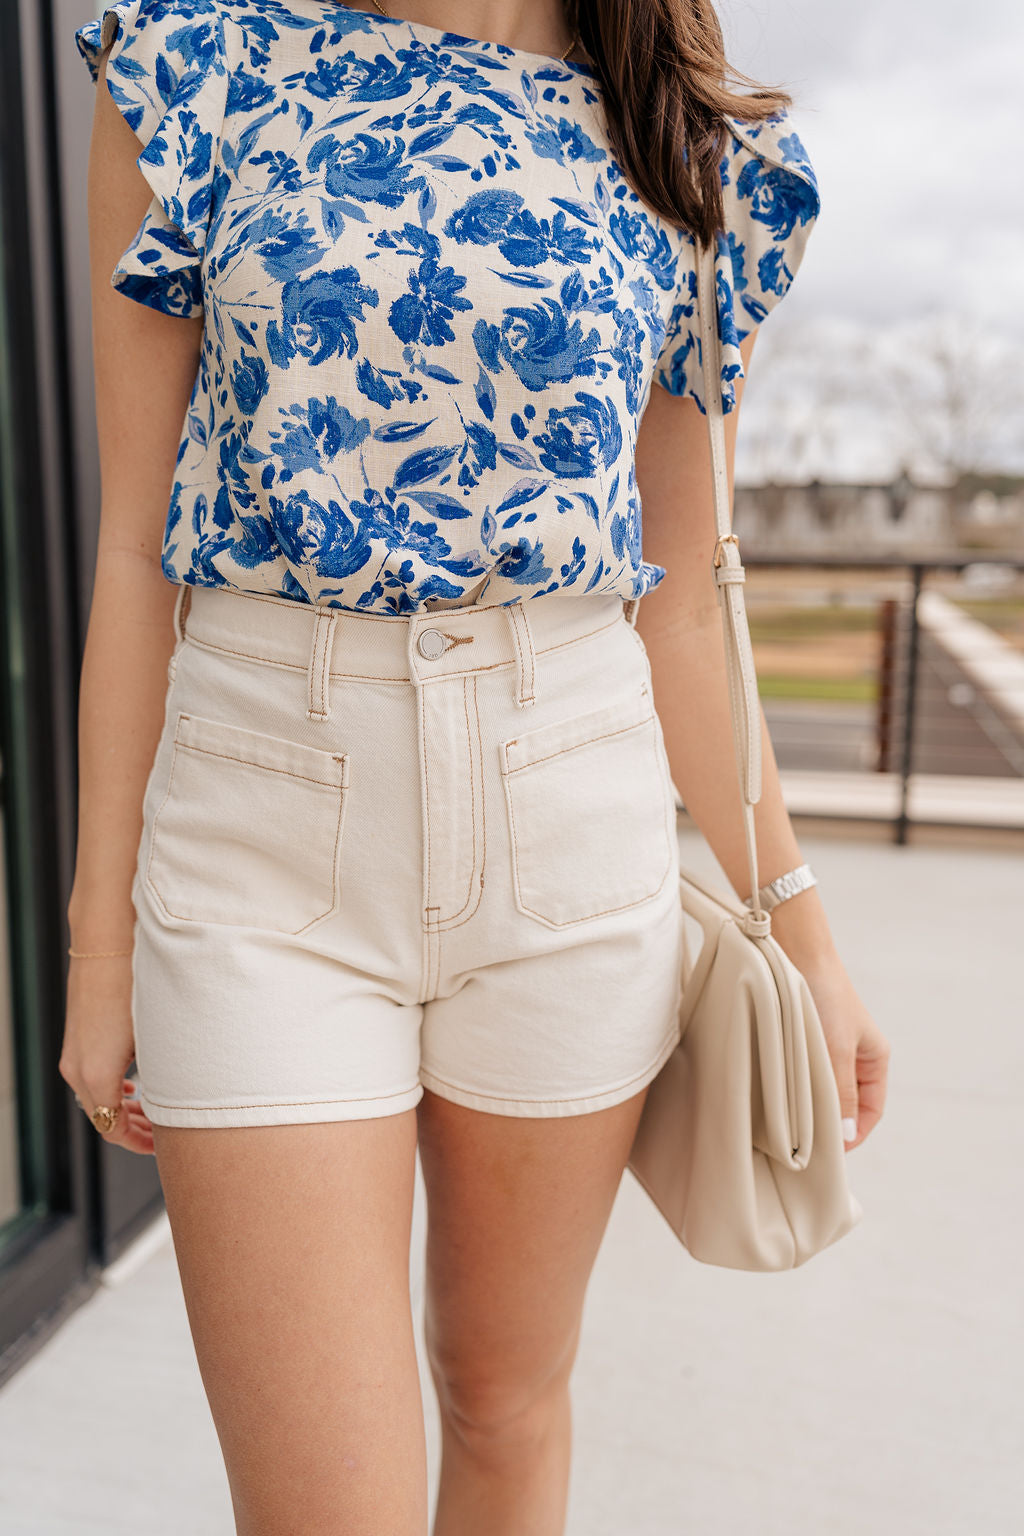 Close-up front view of female brunette model wearing the Mckenzie Off White Denim Shorts that feature off white denim, contrast stitching, pockets, and a high rise. Styled with blue and white floral top.